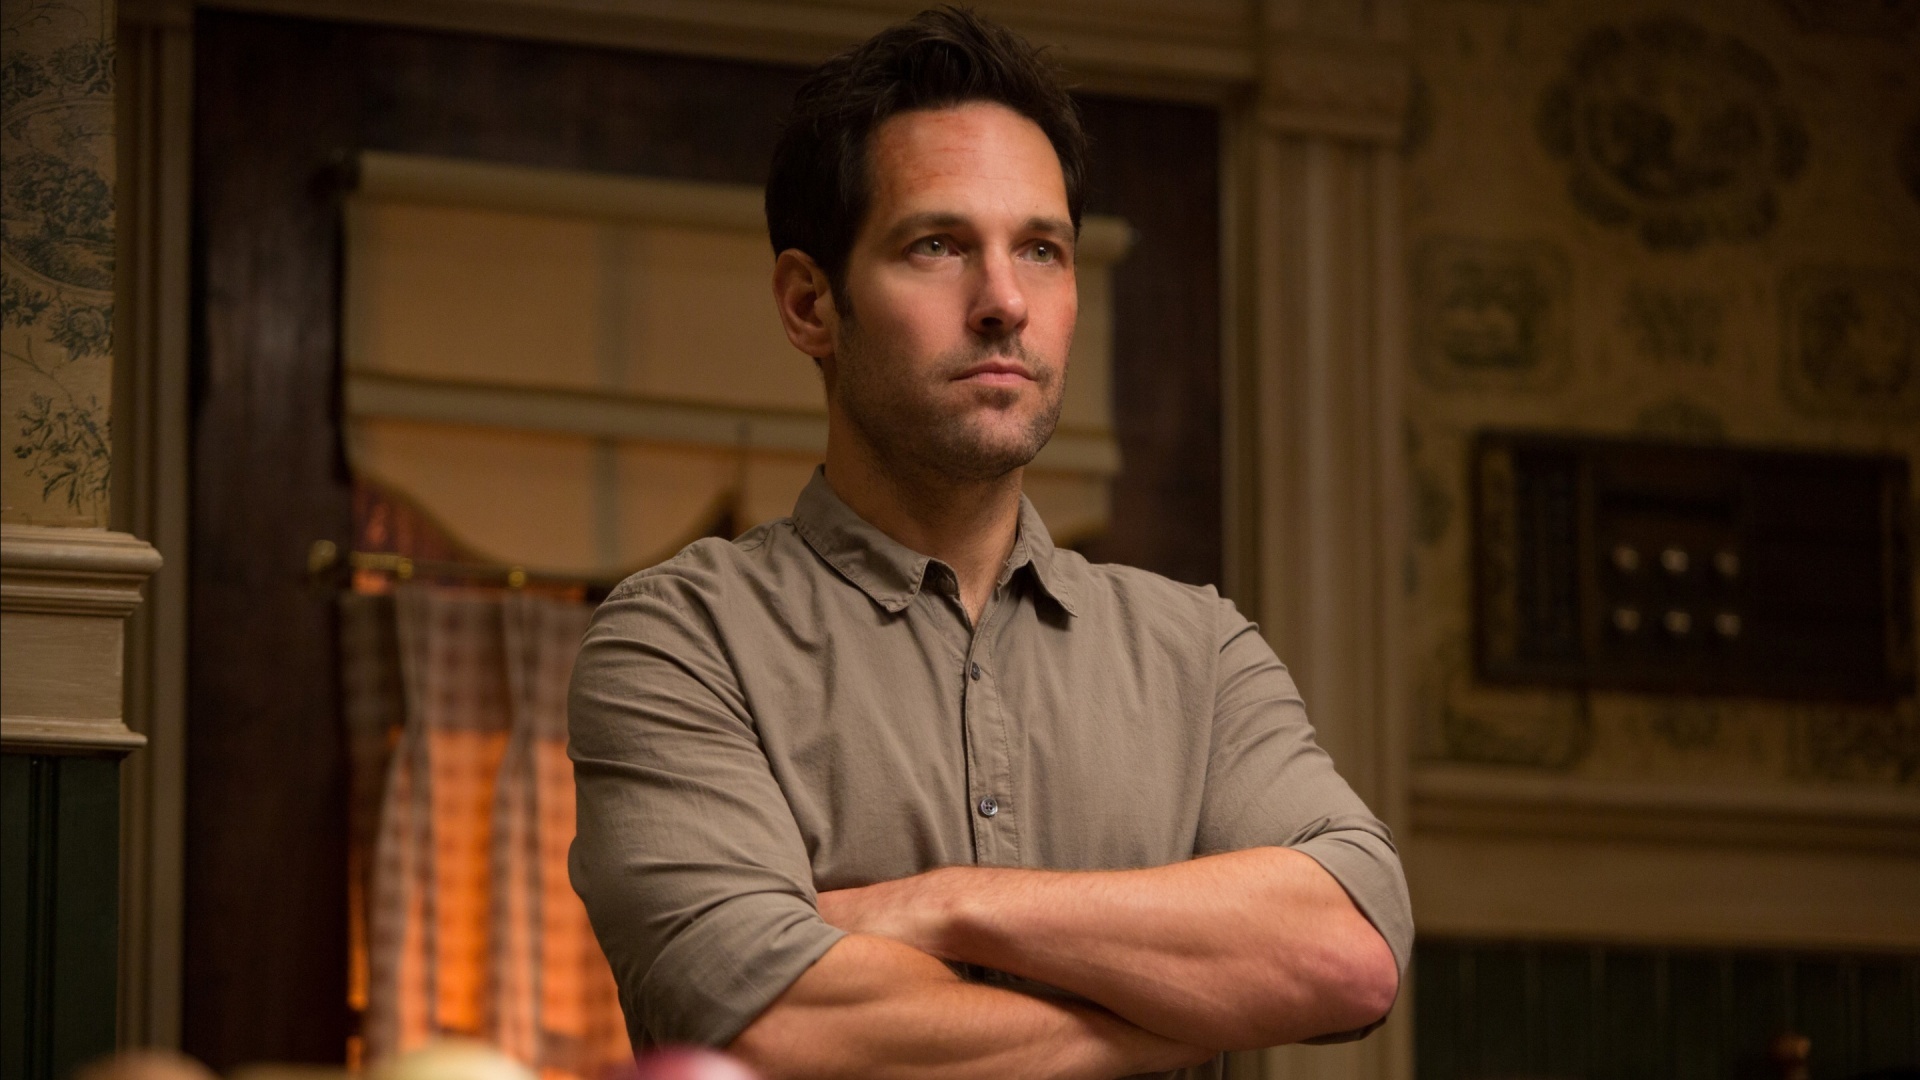 Paul Rudd: Was cast as Lt. Wally Worthington in a 1999 drama film, The Cider House Rules. 1920x1080 Full HD Background.